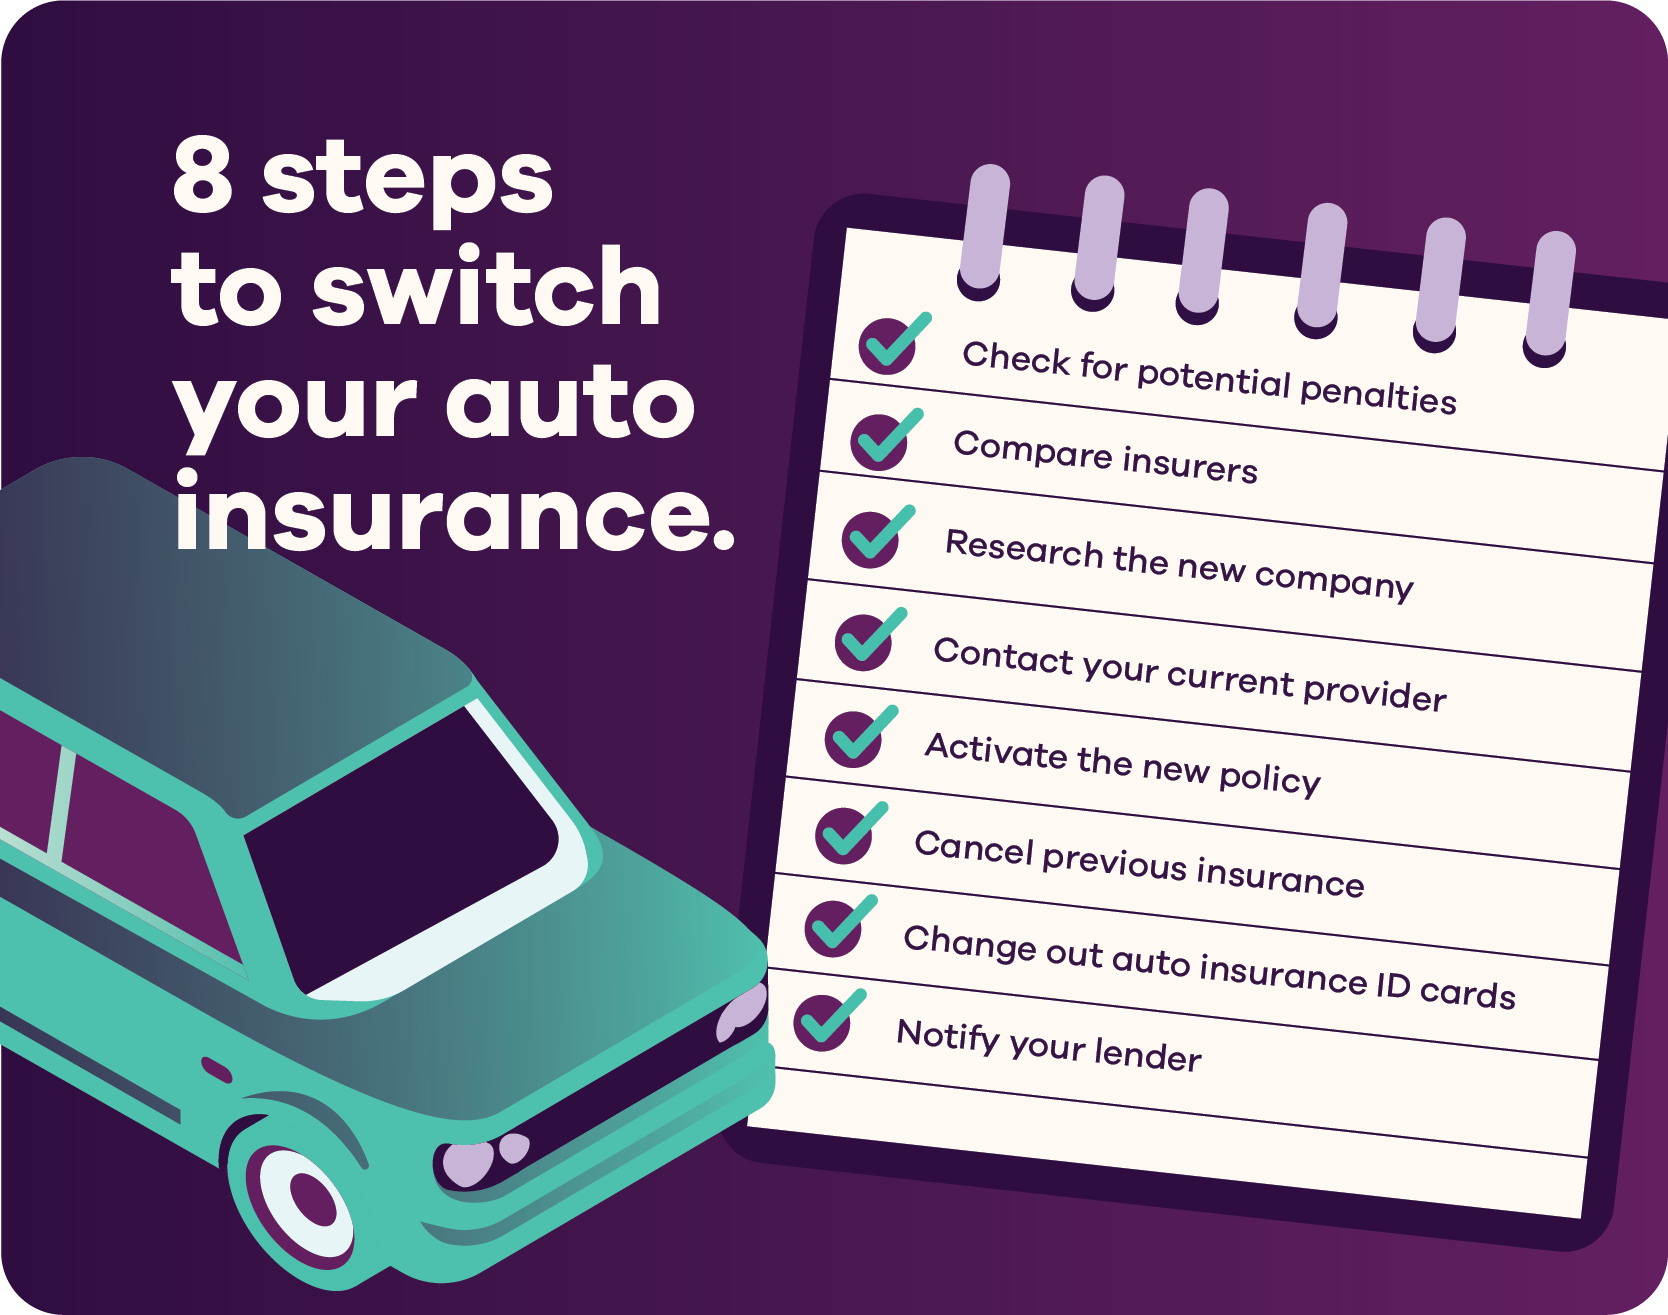 Eight steps to switch your auto insurance. Check for potential penalties. Compare insurers. Research the new company. Contact your current provider. Activate the new policy. Cancel previous insurance. Change out auto insurance ID cards. Notify your lender.